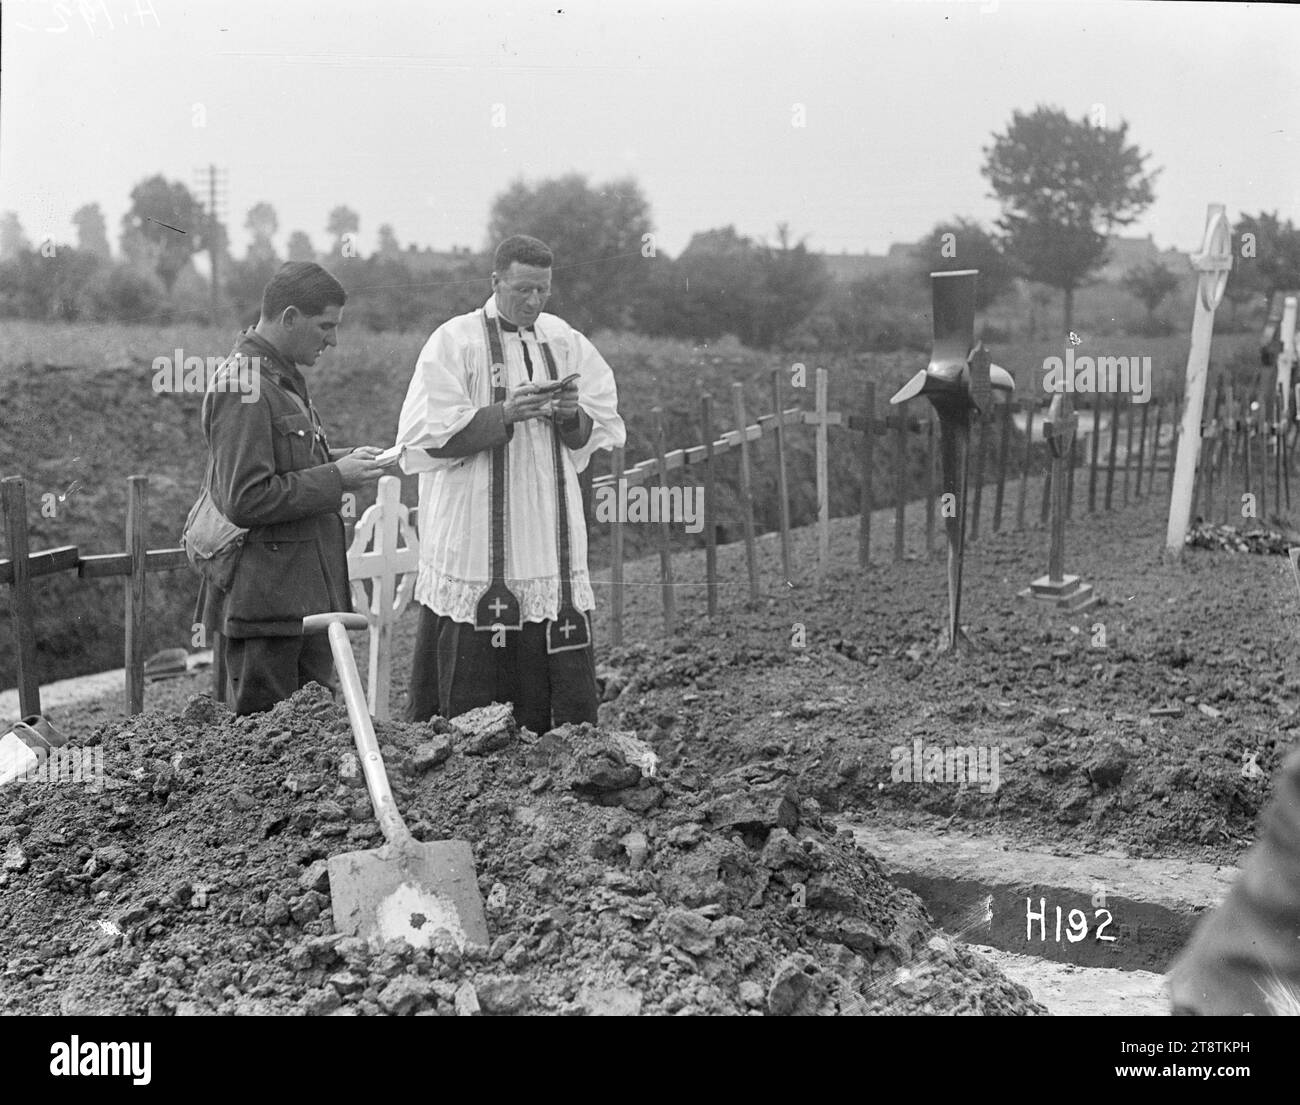 The funeral of Brigadier General Johnston killed in 1917, World War I, Army chaplain identified as Captain Skinner (in white suplice) with Captain Bartley at the graveside of Brigadier General Francis Earl Johnston during his funeral. Photograph taken France 18 August 1917 Stock Photo